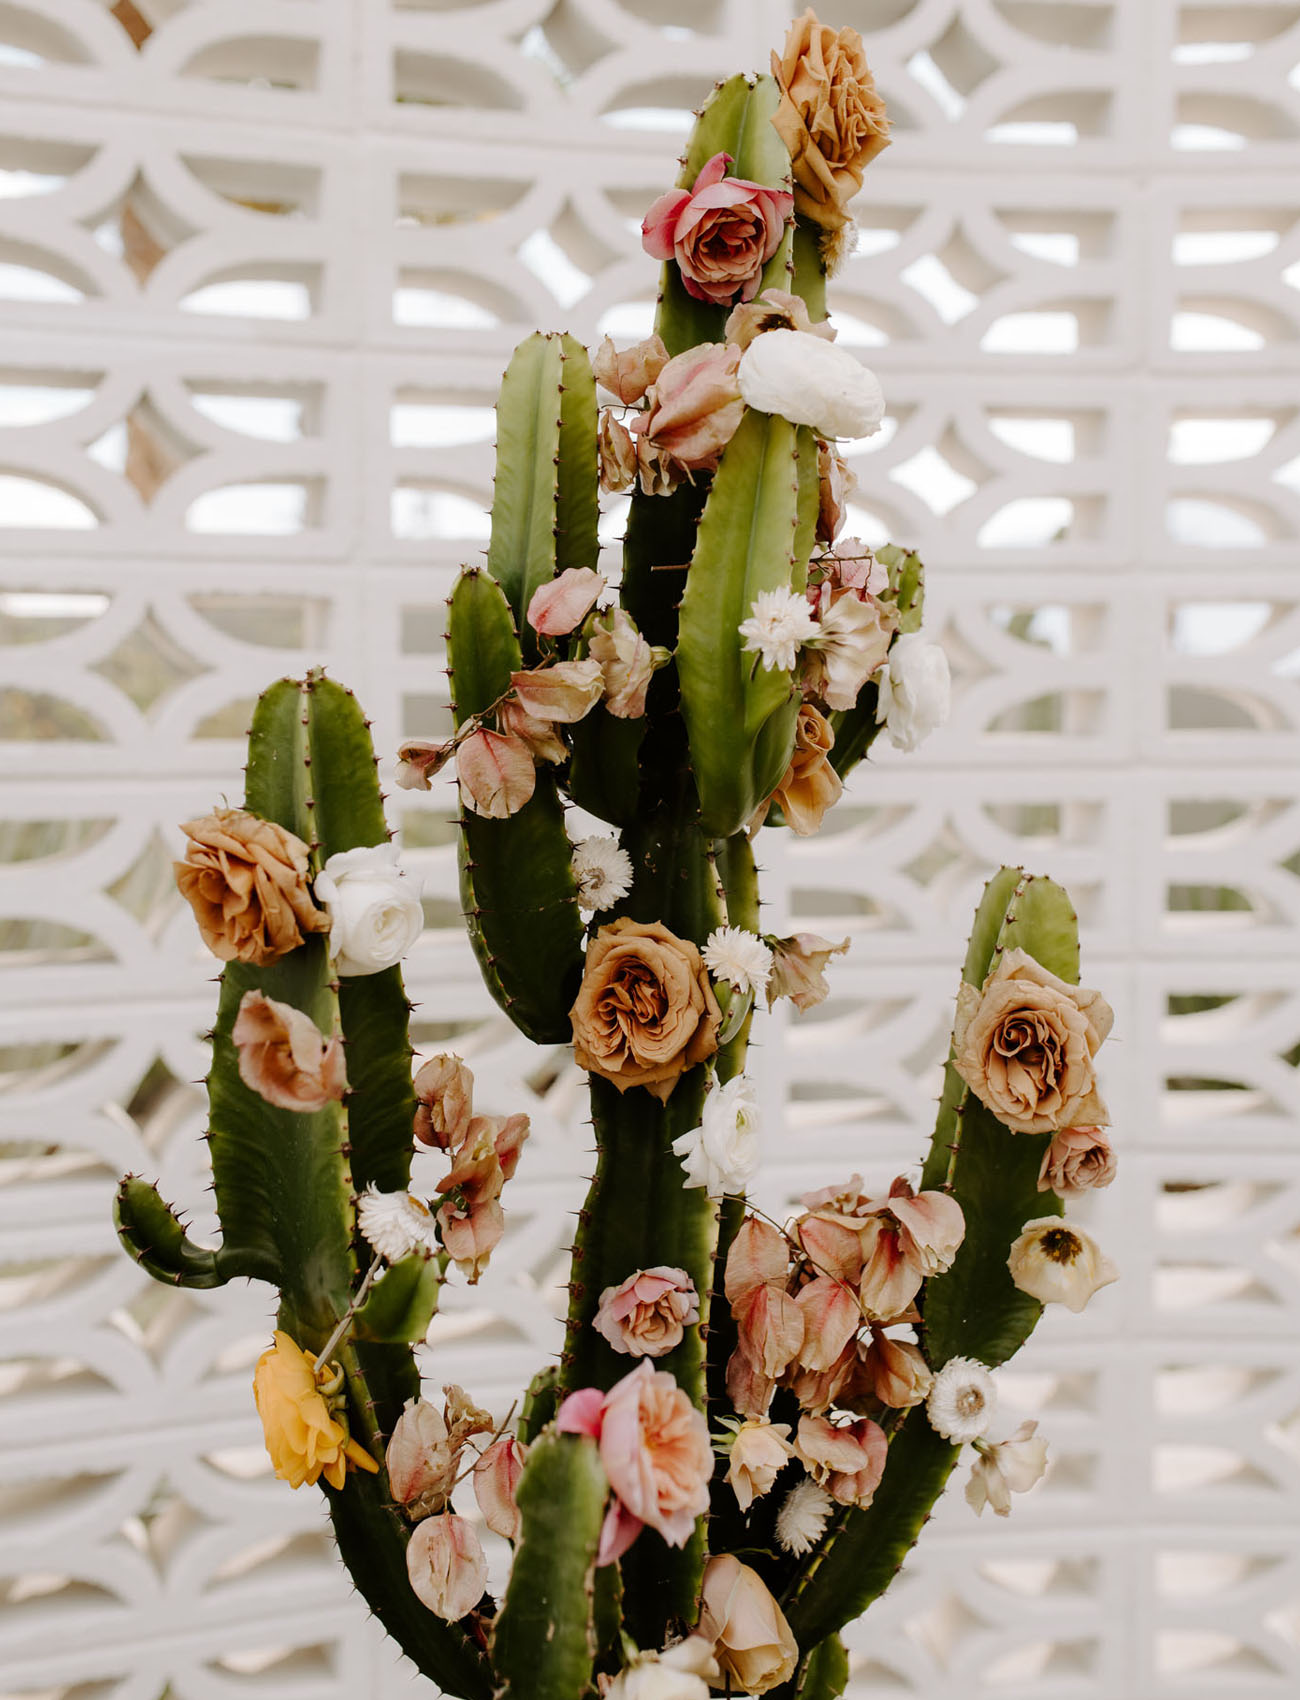 cactus with flowers